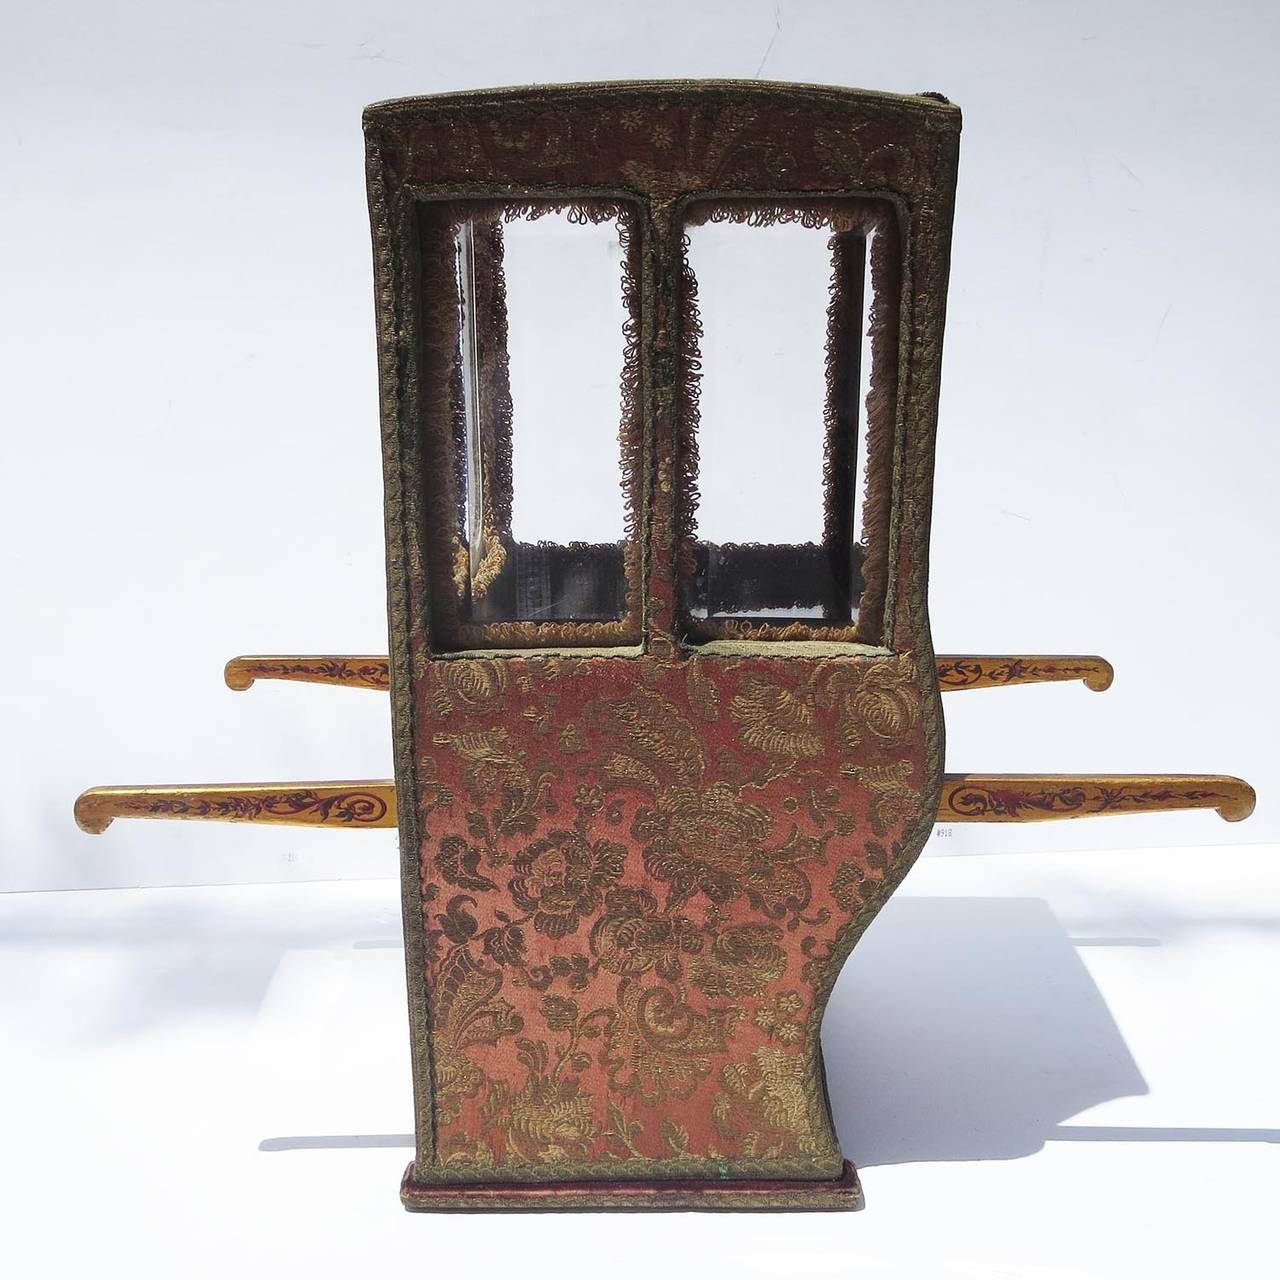 The sedan chair came into use in the 1600s and was the preferred method of transport for the wealthy of Europe. Burly porters lifted the unit off the ground and carried the rich though filthy city streets, protected in their enclosed environment.